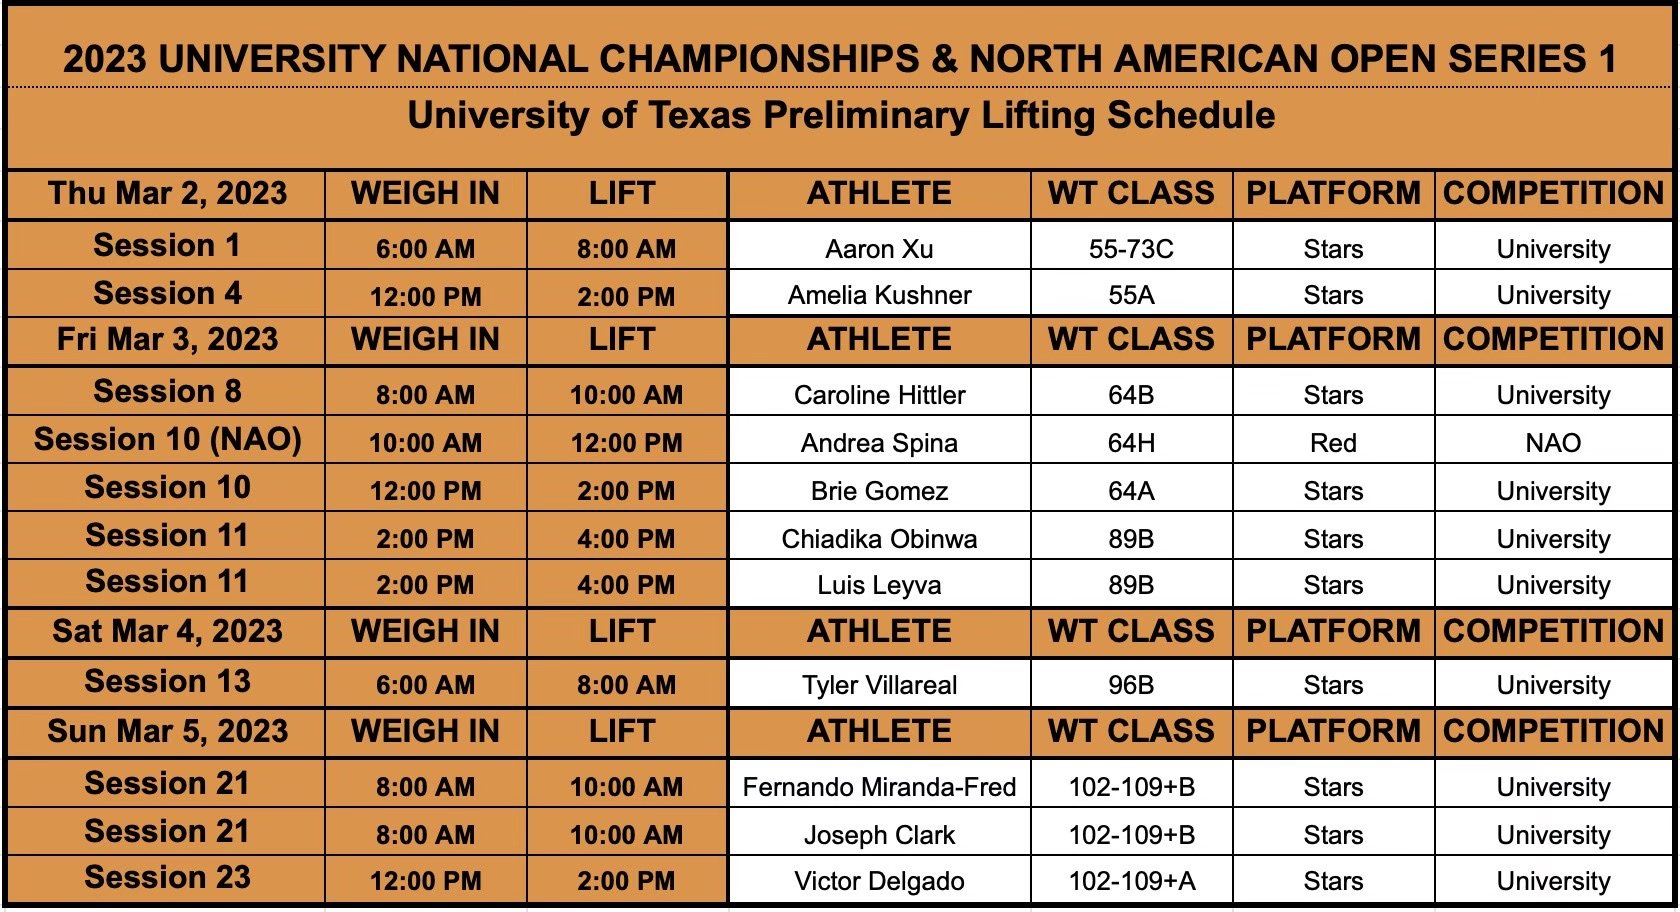 Competitions — UTexas Weightlifting